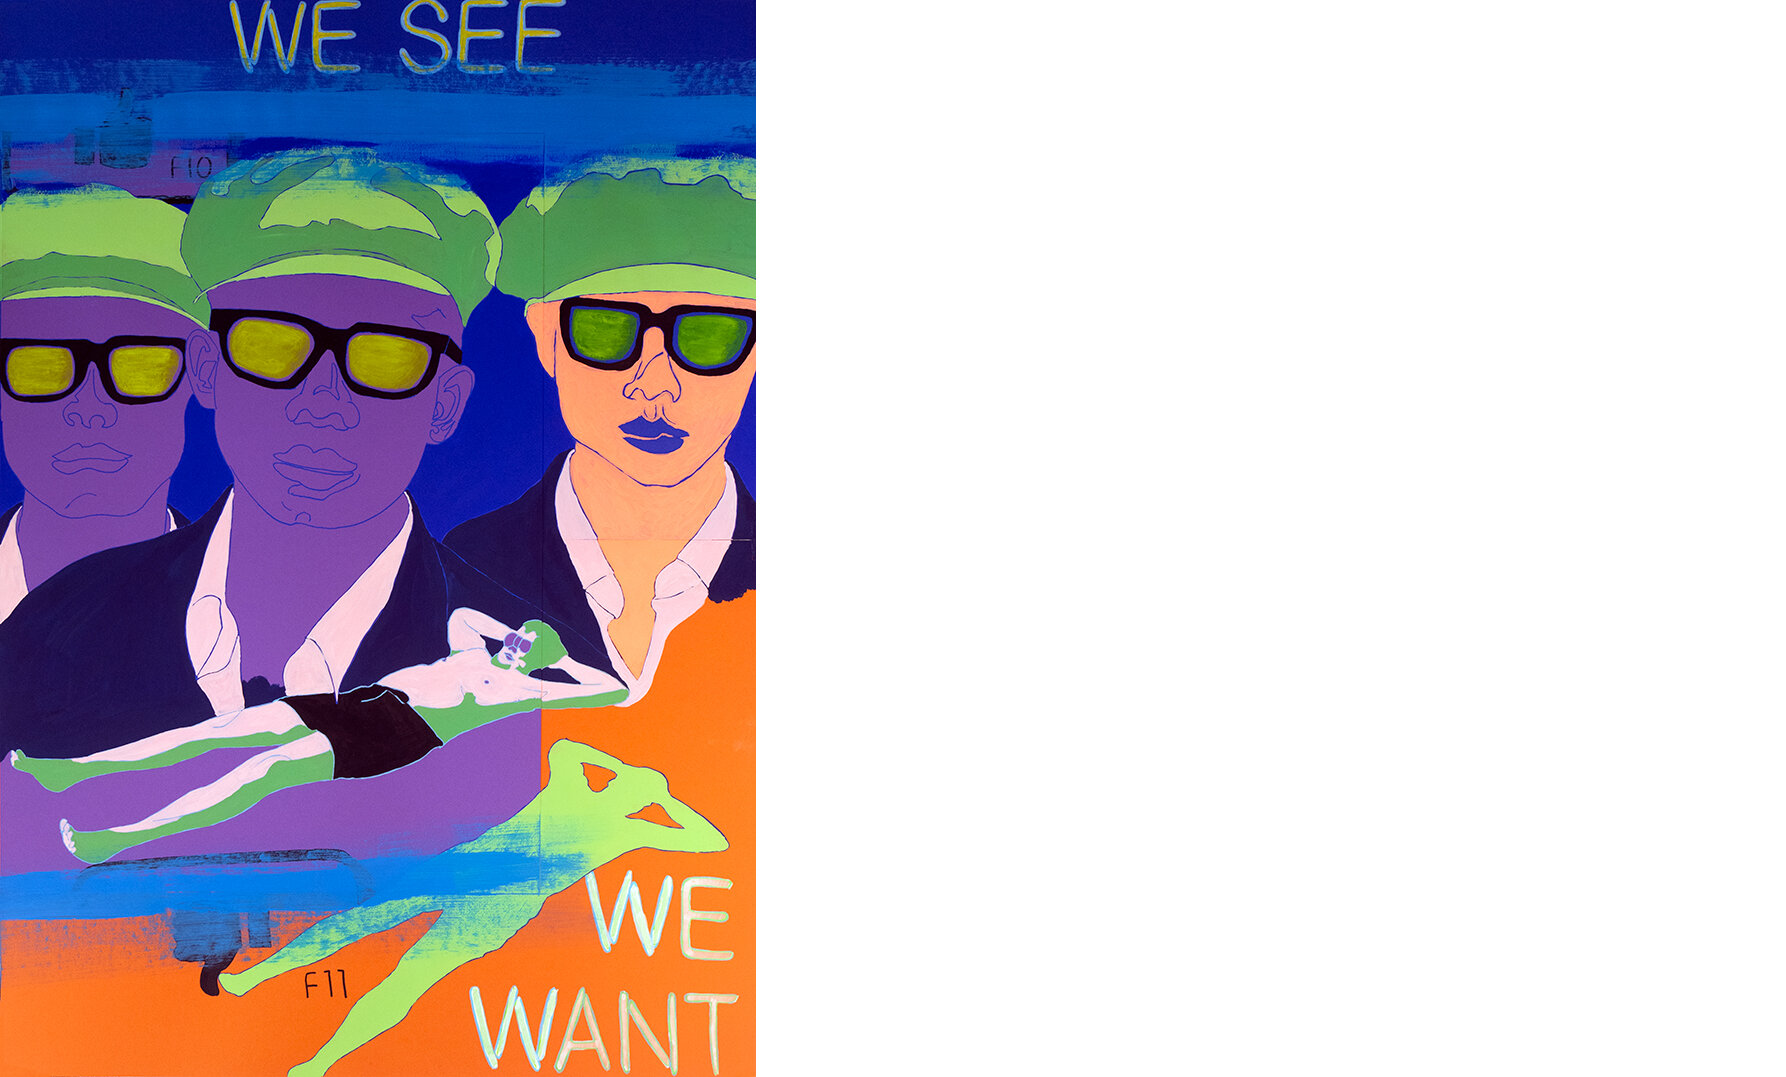   We see we want (2020) Loïc Martin (from the Ur path isn’t mine series)   Canson paper, acrylic paint, acrylic markers (39,4 x 27,5 inches / 100 x 70 cm) 